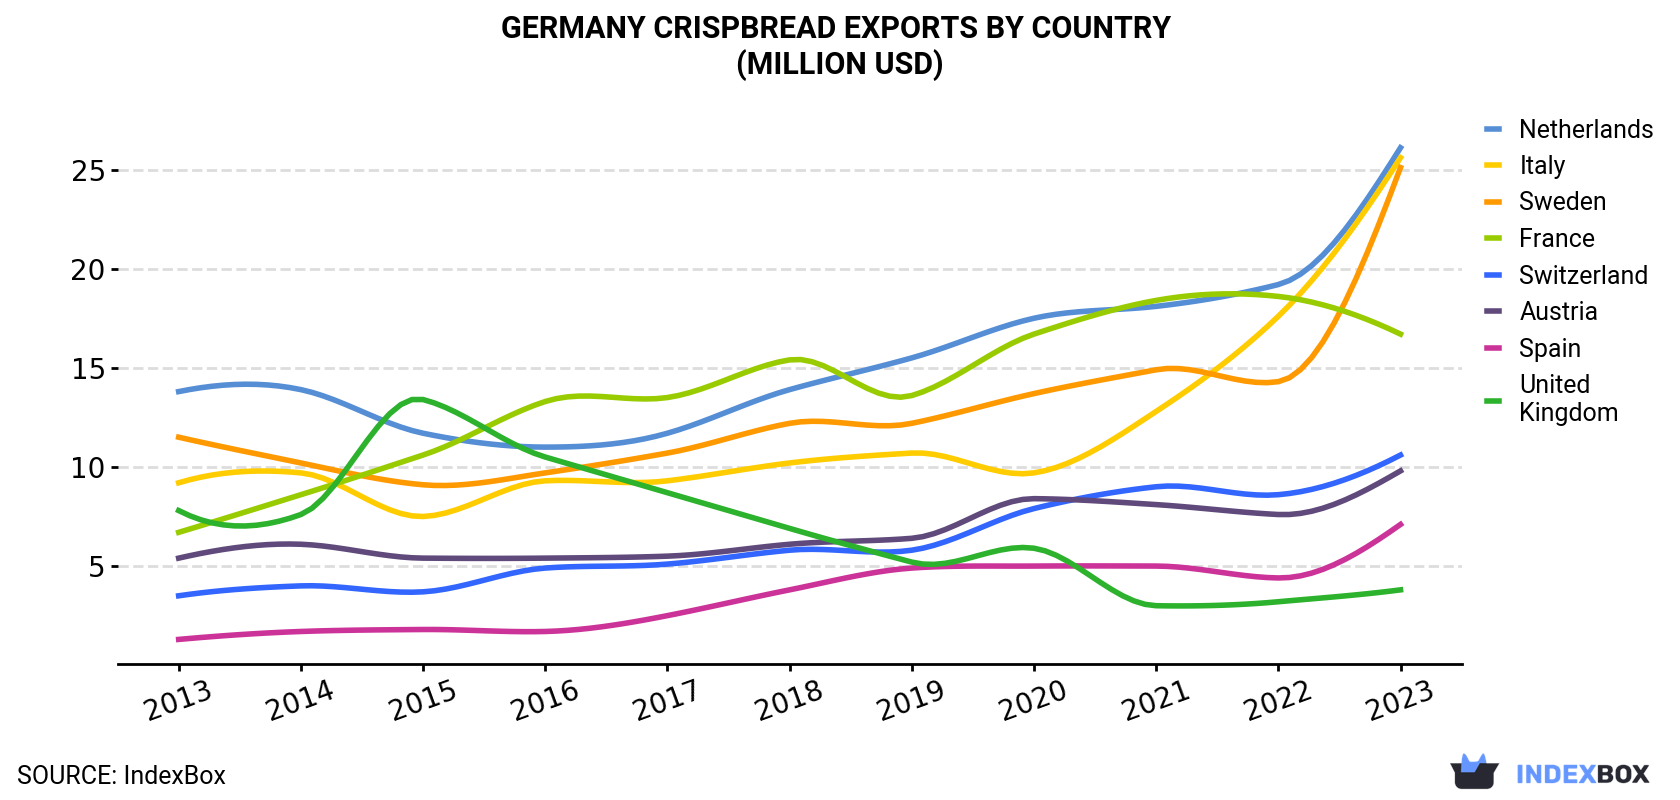 Germany Crispbread Exports By Country (Million USD)